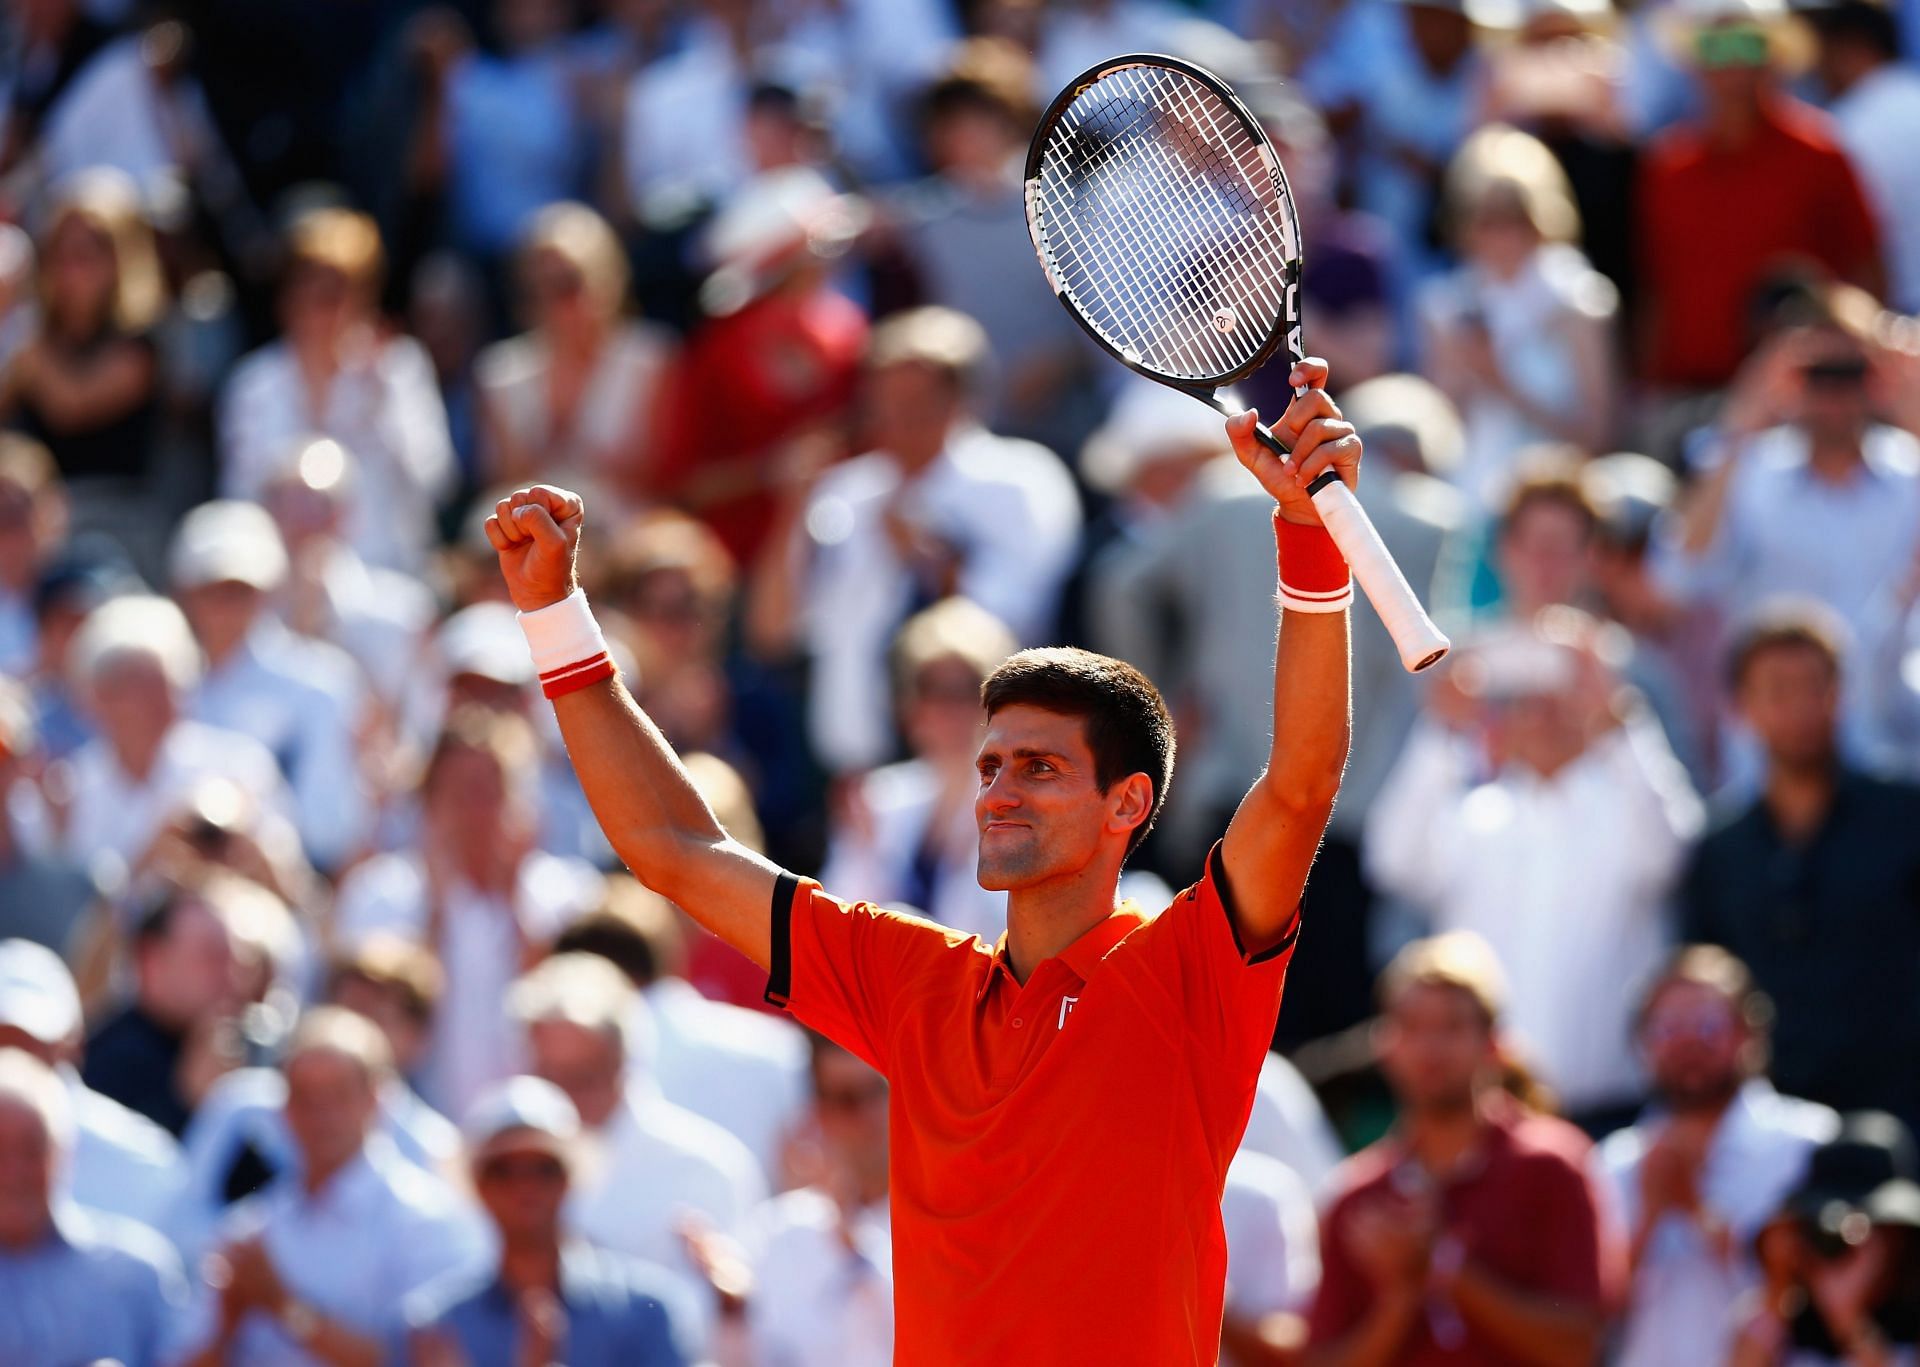 2015 French Open - Day 11 - Novak Djokovic exults after beating Rafael Nadal